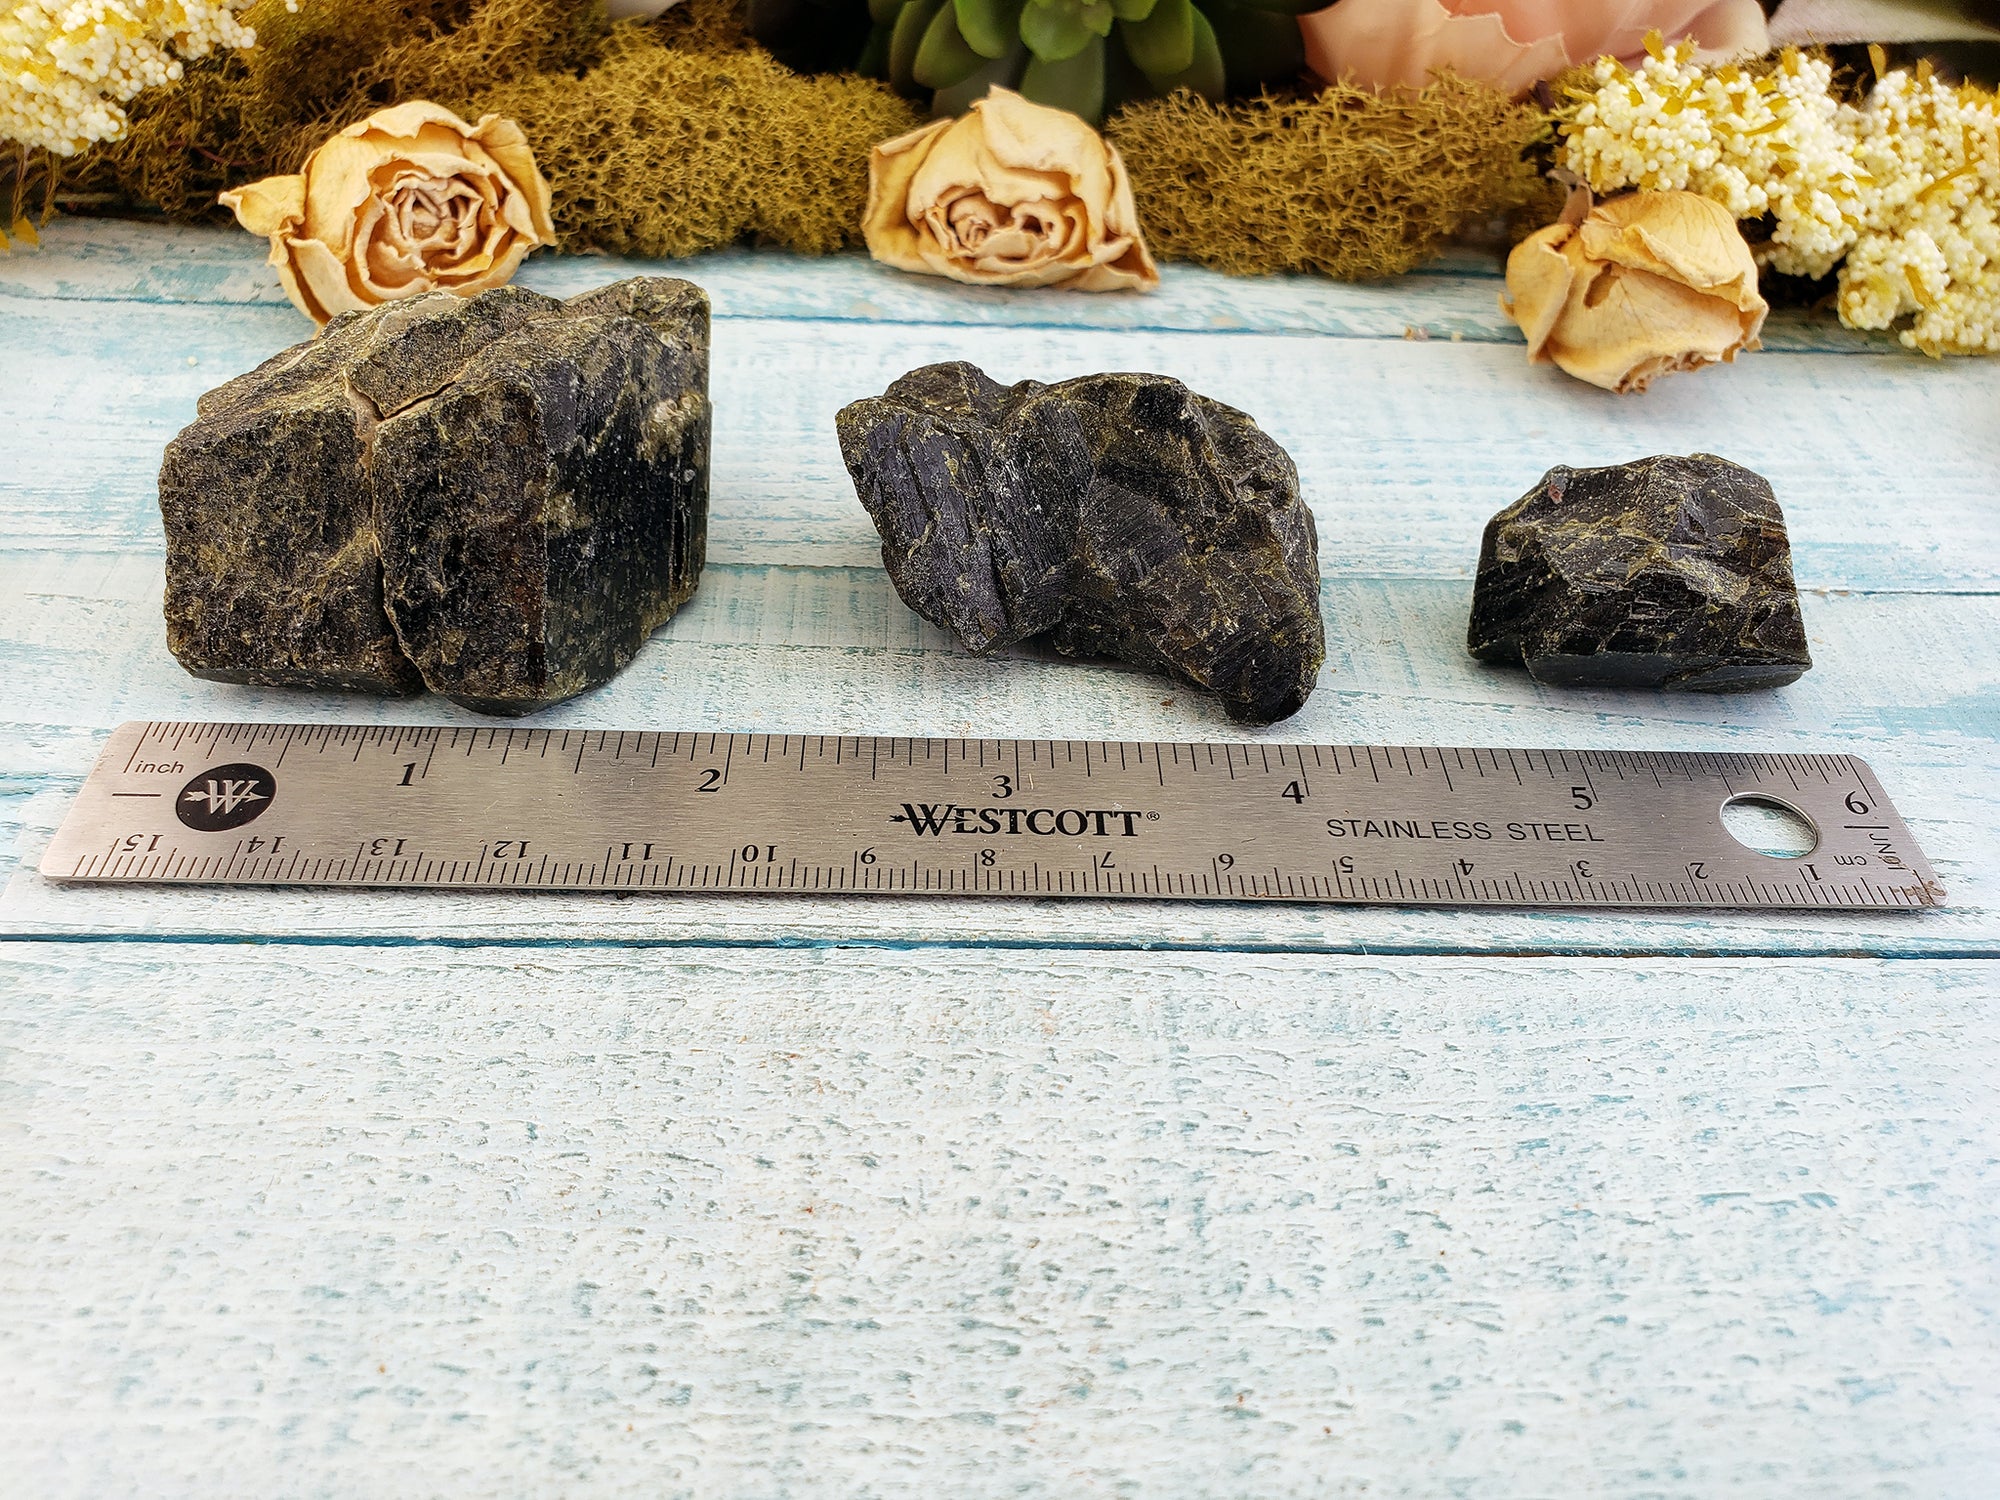 three rough epidote crystal pieces by ruler comparing various sizes from large to small